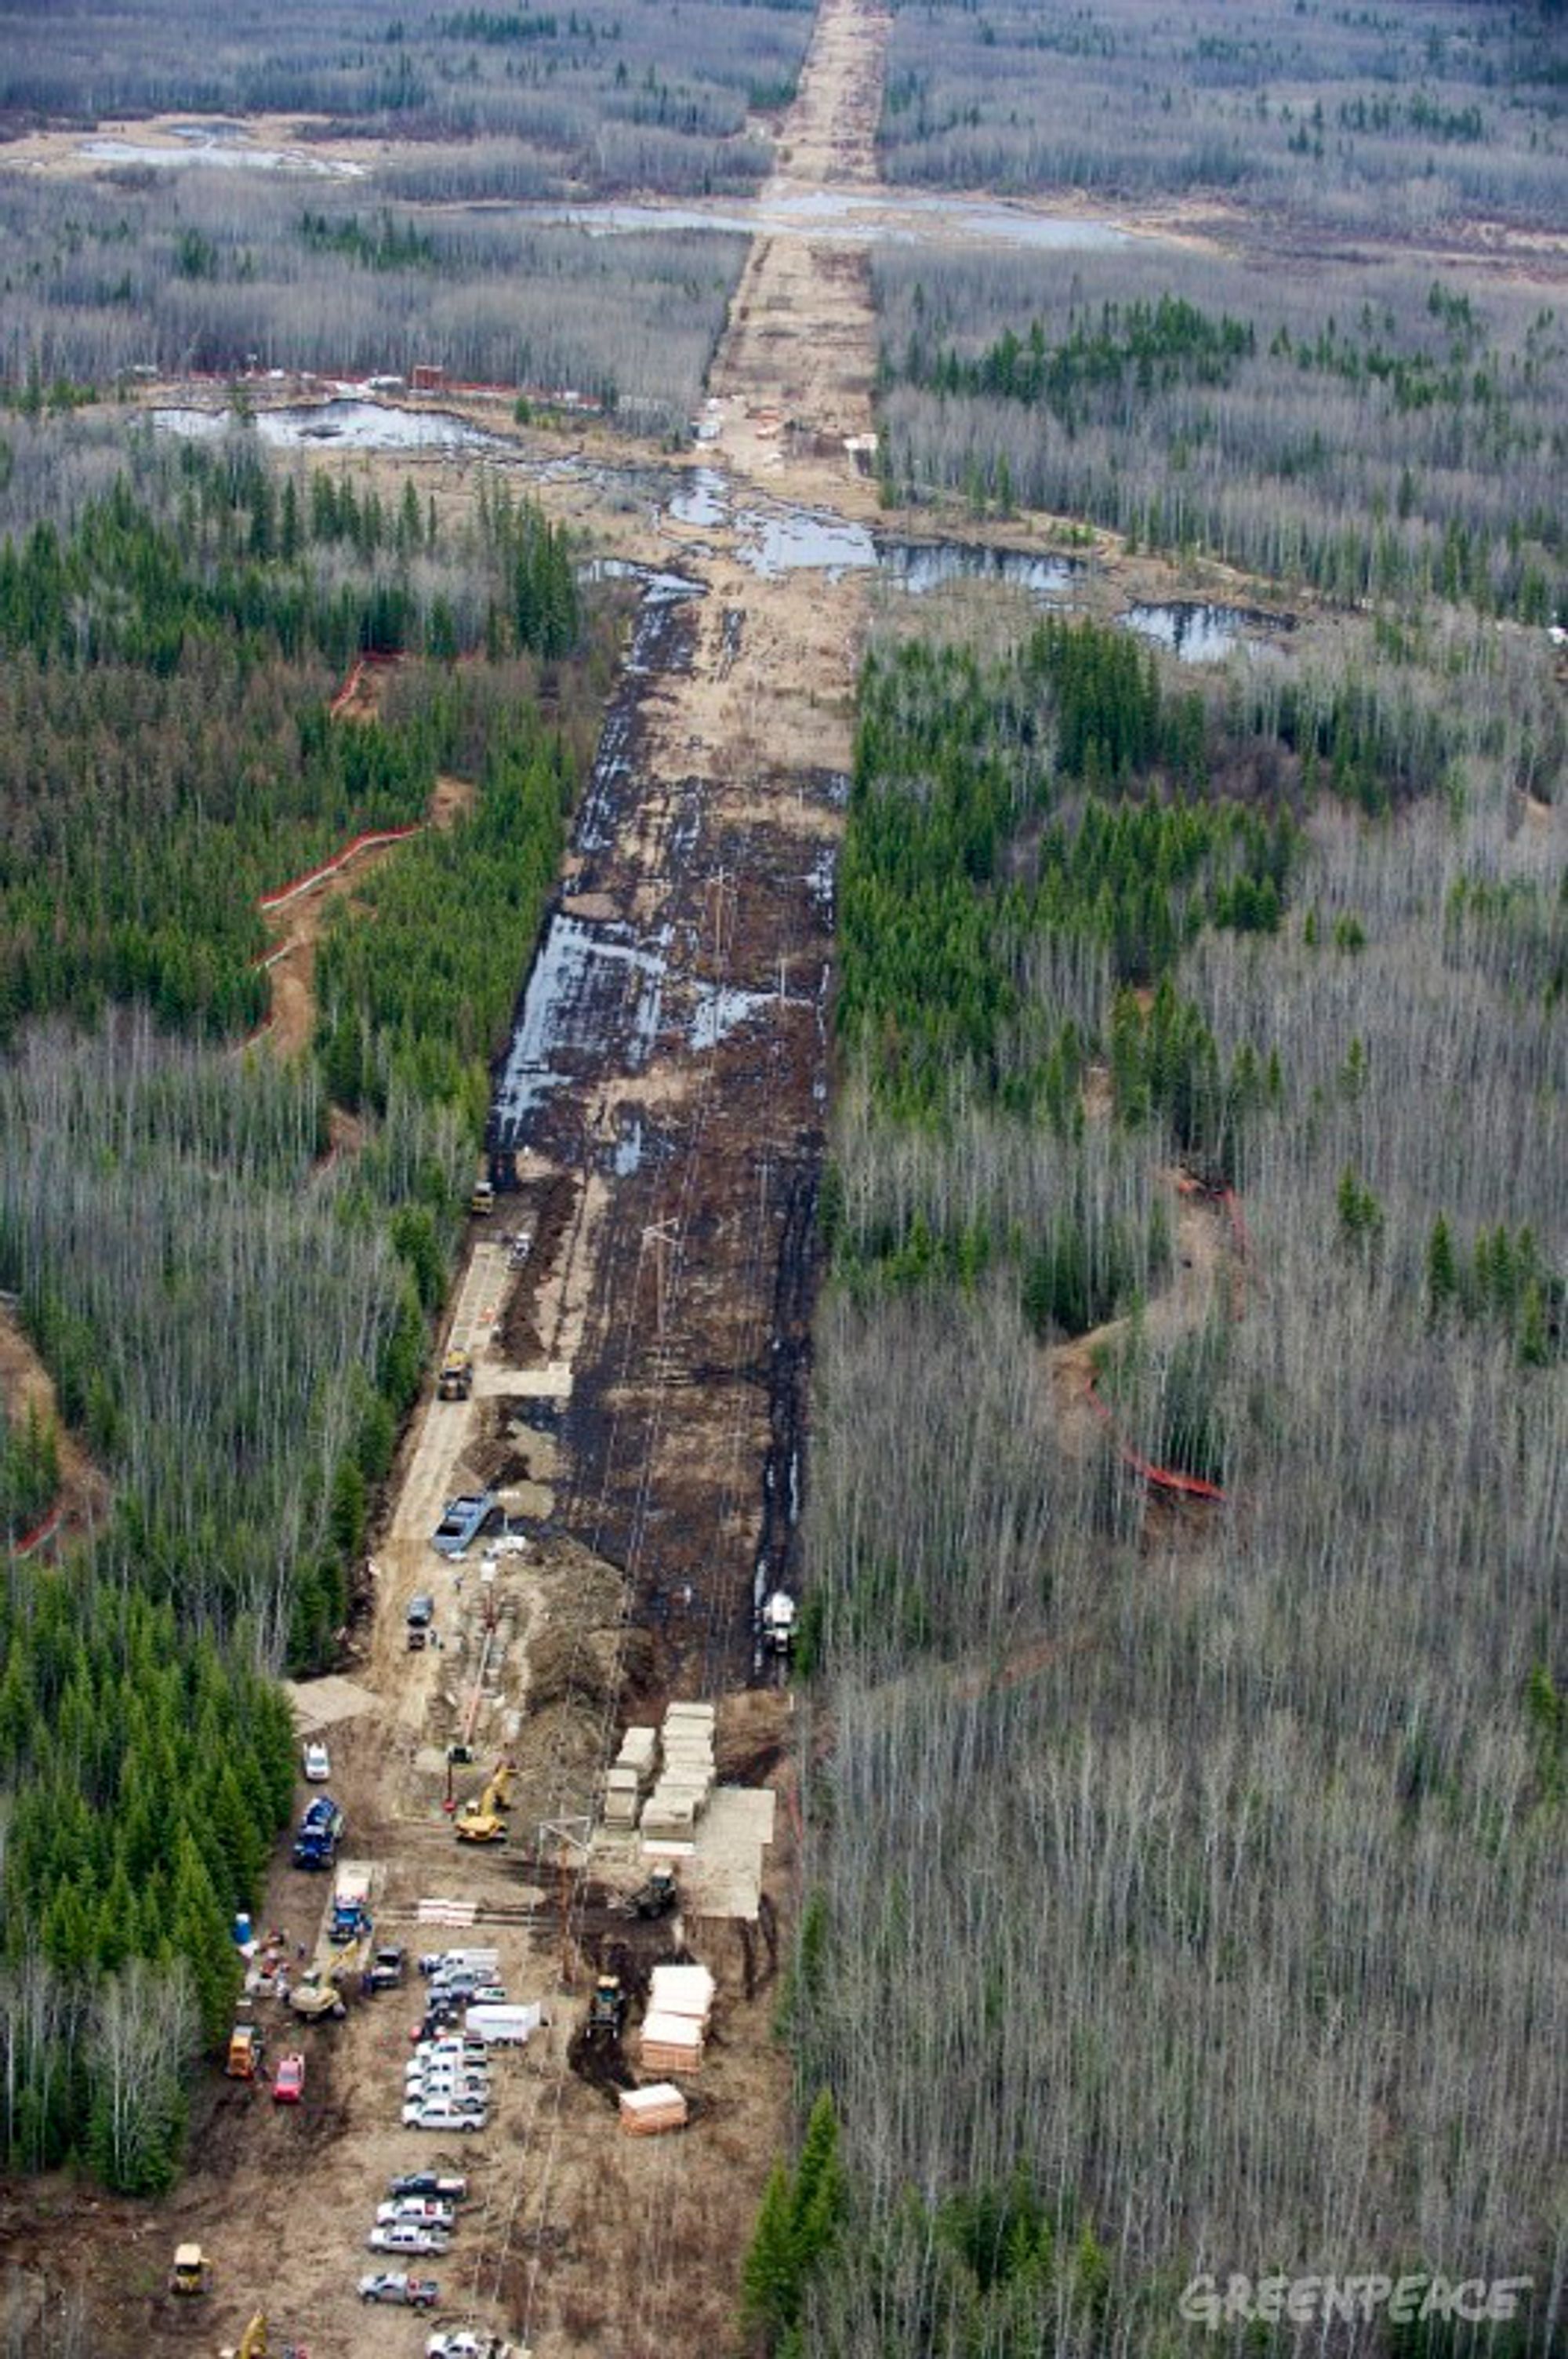 May 5, 2011 - Evi, Alberta, Canada - Crews work to clean up at Rainbow Pipeline's oil spill, the worst Alberta oil spill in 35 years, dumping 28, 000 barrels of oil into a wetland area at Evi, Alberta which is near Little Buffalo, Alberta, Canada. Rainbow Pipeline is owned by a Canadian subsidiary of Houston-based Plains All American Pipeline L.P. PHOTO BY ROGU COLLECTI / GREENPEACEPHOTO CREDIT MUST BE INCLUDEDONE TIME USE DO NOT ARCHIVE 28.000 fat olje har lekket ut i et indianerreservat i Alberta, Canada.